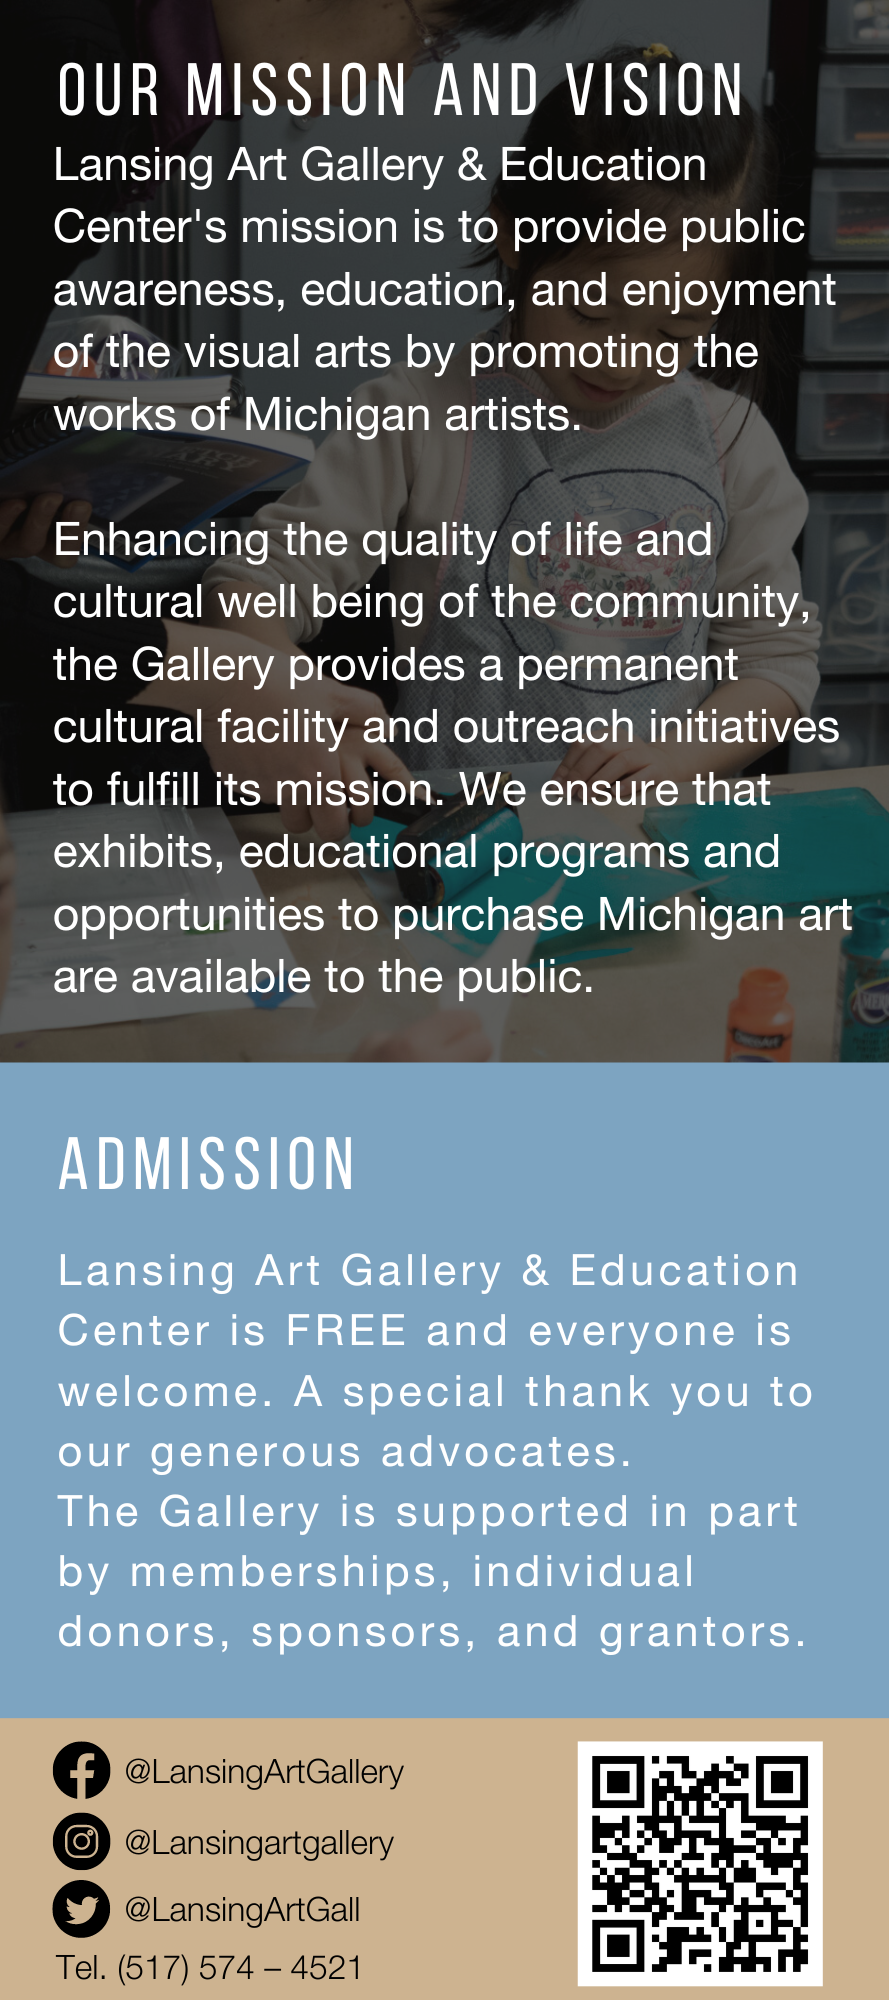 Image with "Our Mission and Vision," that states: "Lansing Art Gallery & Education Center's mission is to provide public awareness, education, and enjoyment of the visual arts by promoting the works of Michigan artists.  Enhancing the quality of life and cultural well being of the community, the Gallery provides a permanent cultural facility and outreach initiatives to fulfill its mission. We ensure that exhibits, educational programs and opportunities to purchase Michigan art are available to the public.."